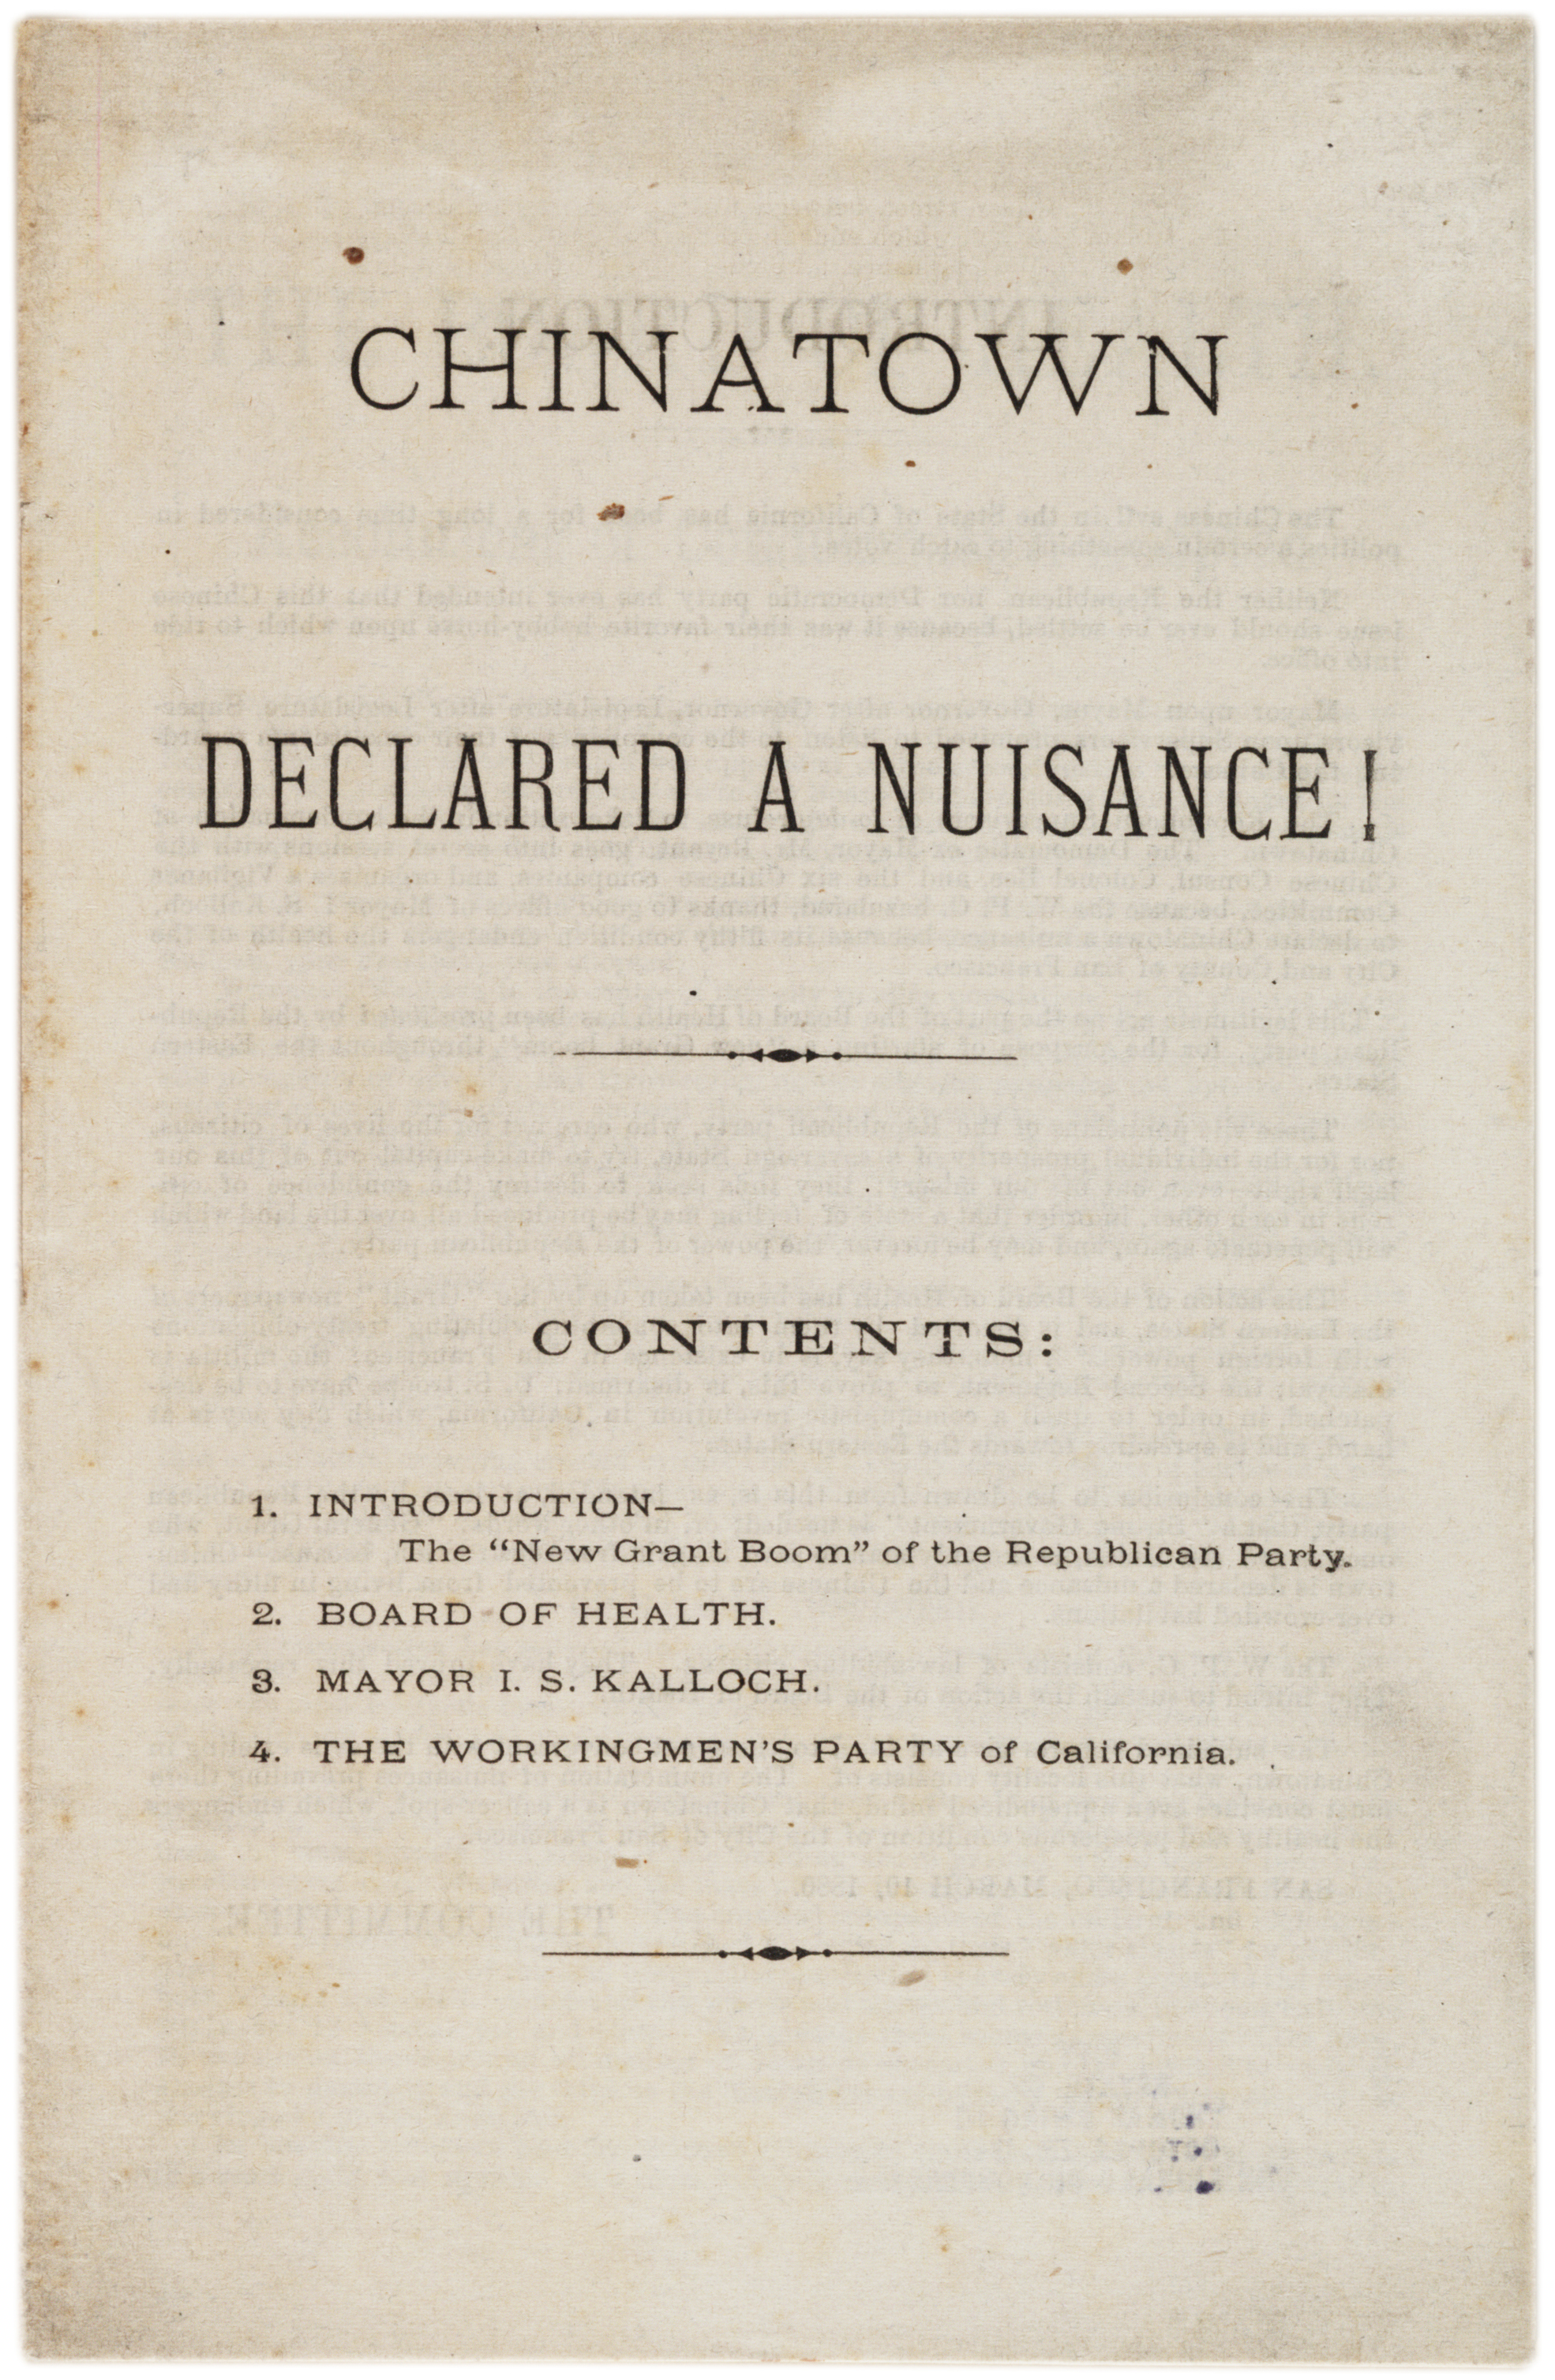 "Chinatown Declared a Nuisance!" by the Workingmen's Party of California, 1880. (Gilder Lehrman Institute, GLC06232.03)